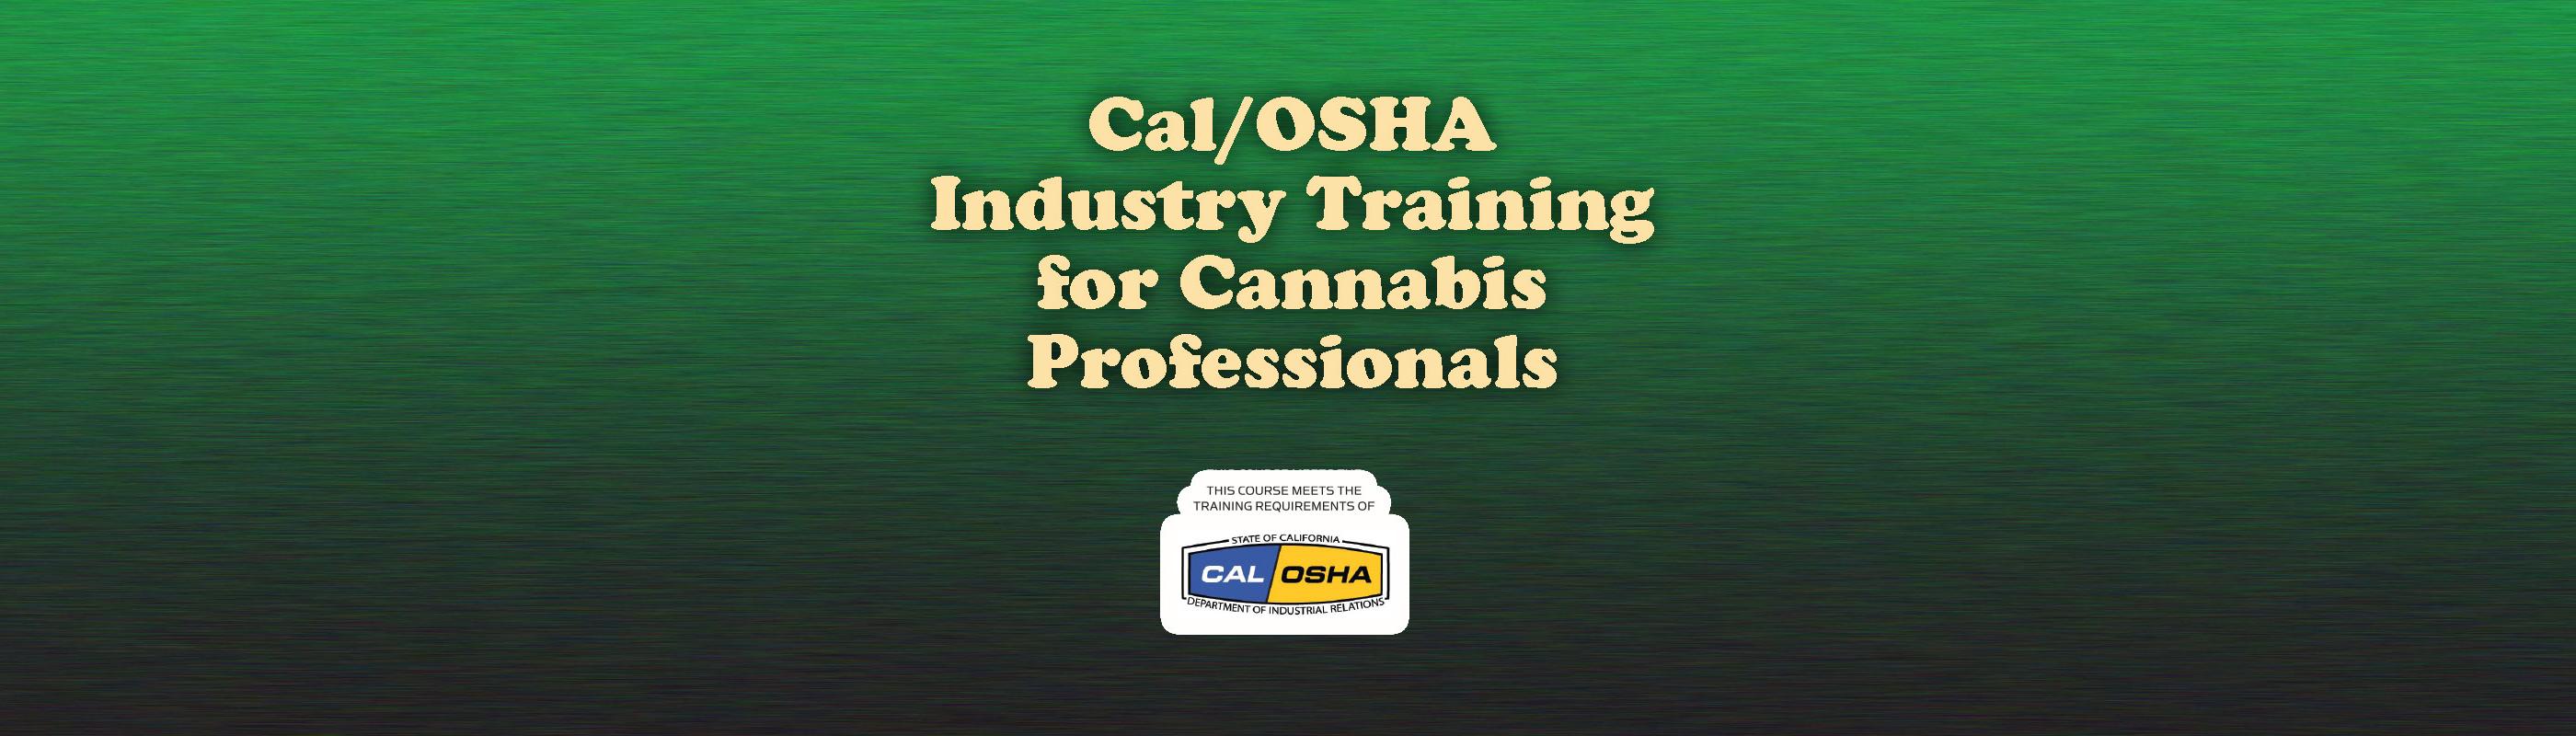 Cal/OSHA Industry Training  for Cannabis Professionals - This course meets the training requirements of Cal/OSHA